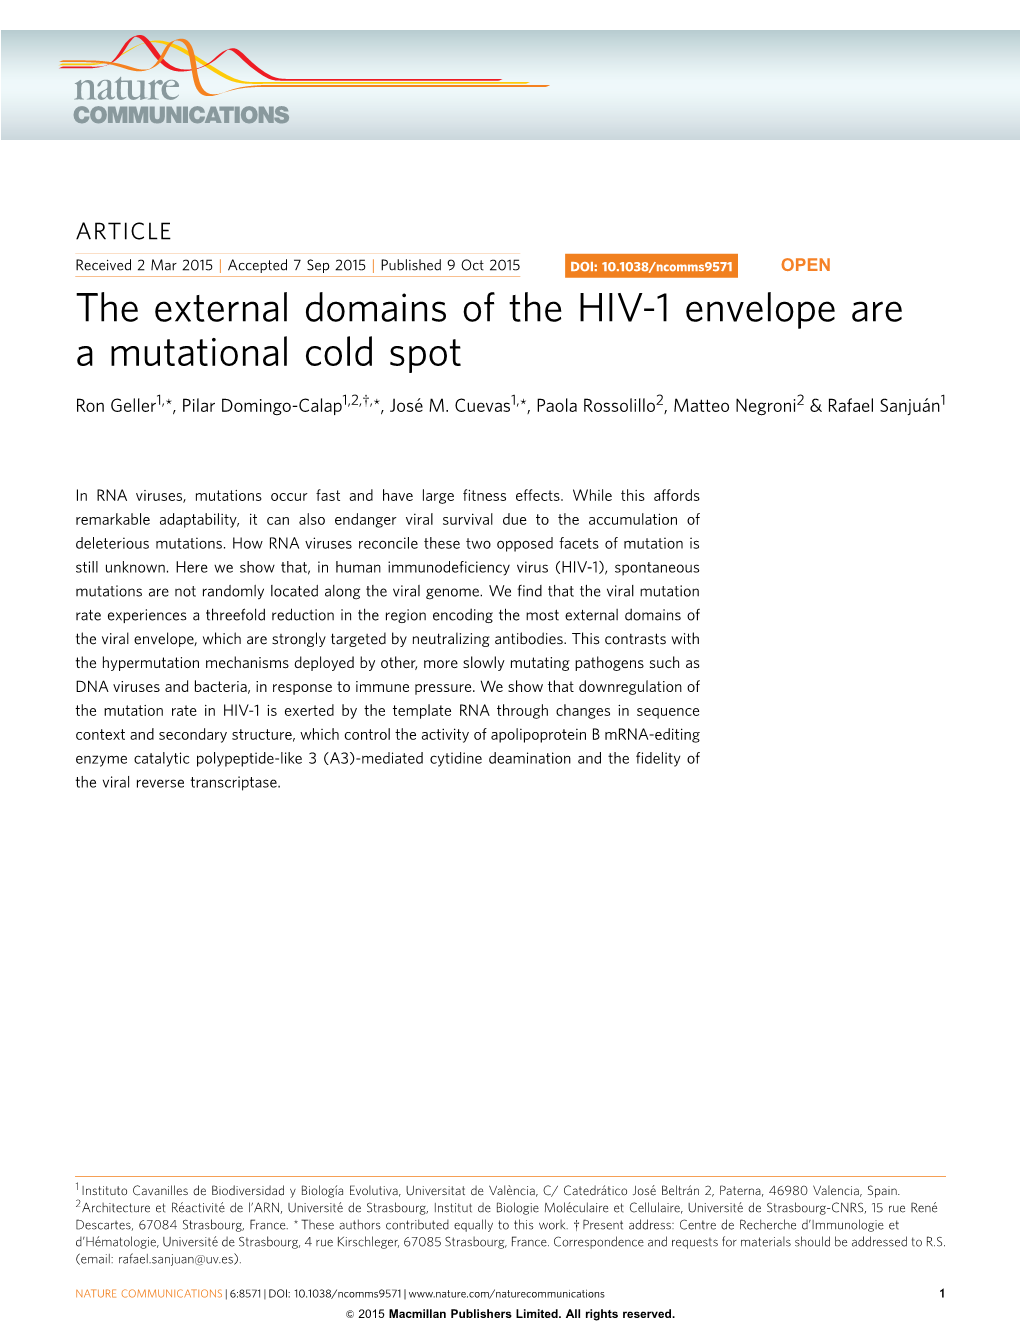 The External Domains of the HIV-1 Envelope Are a Mutational Cold Spot